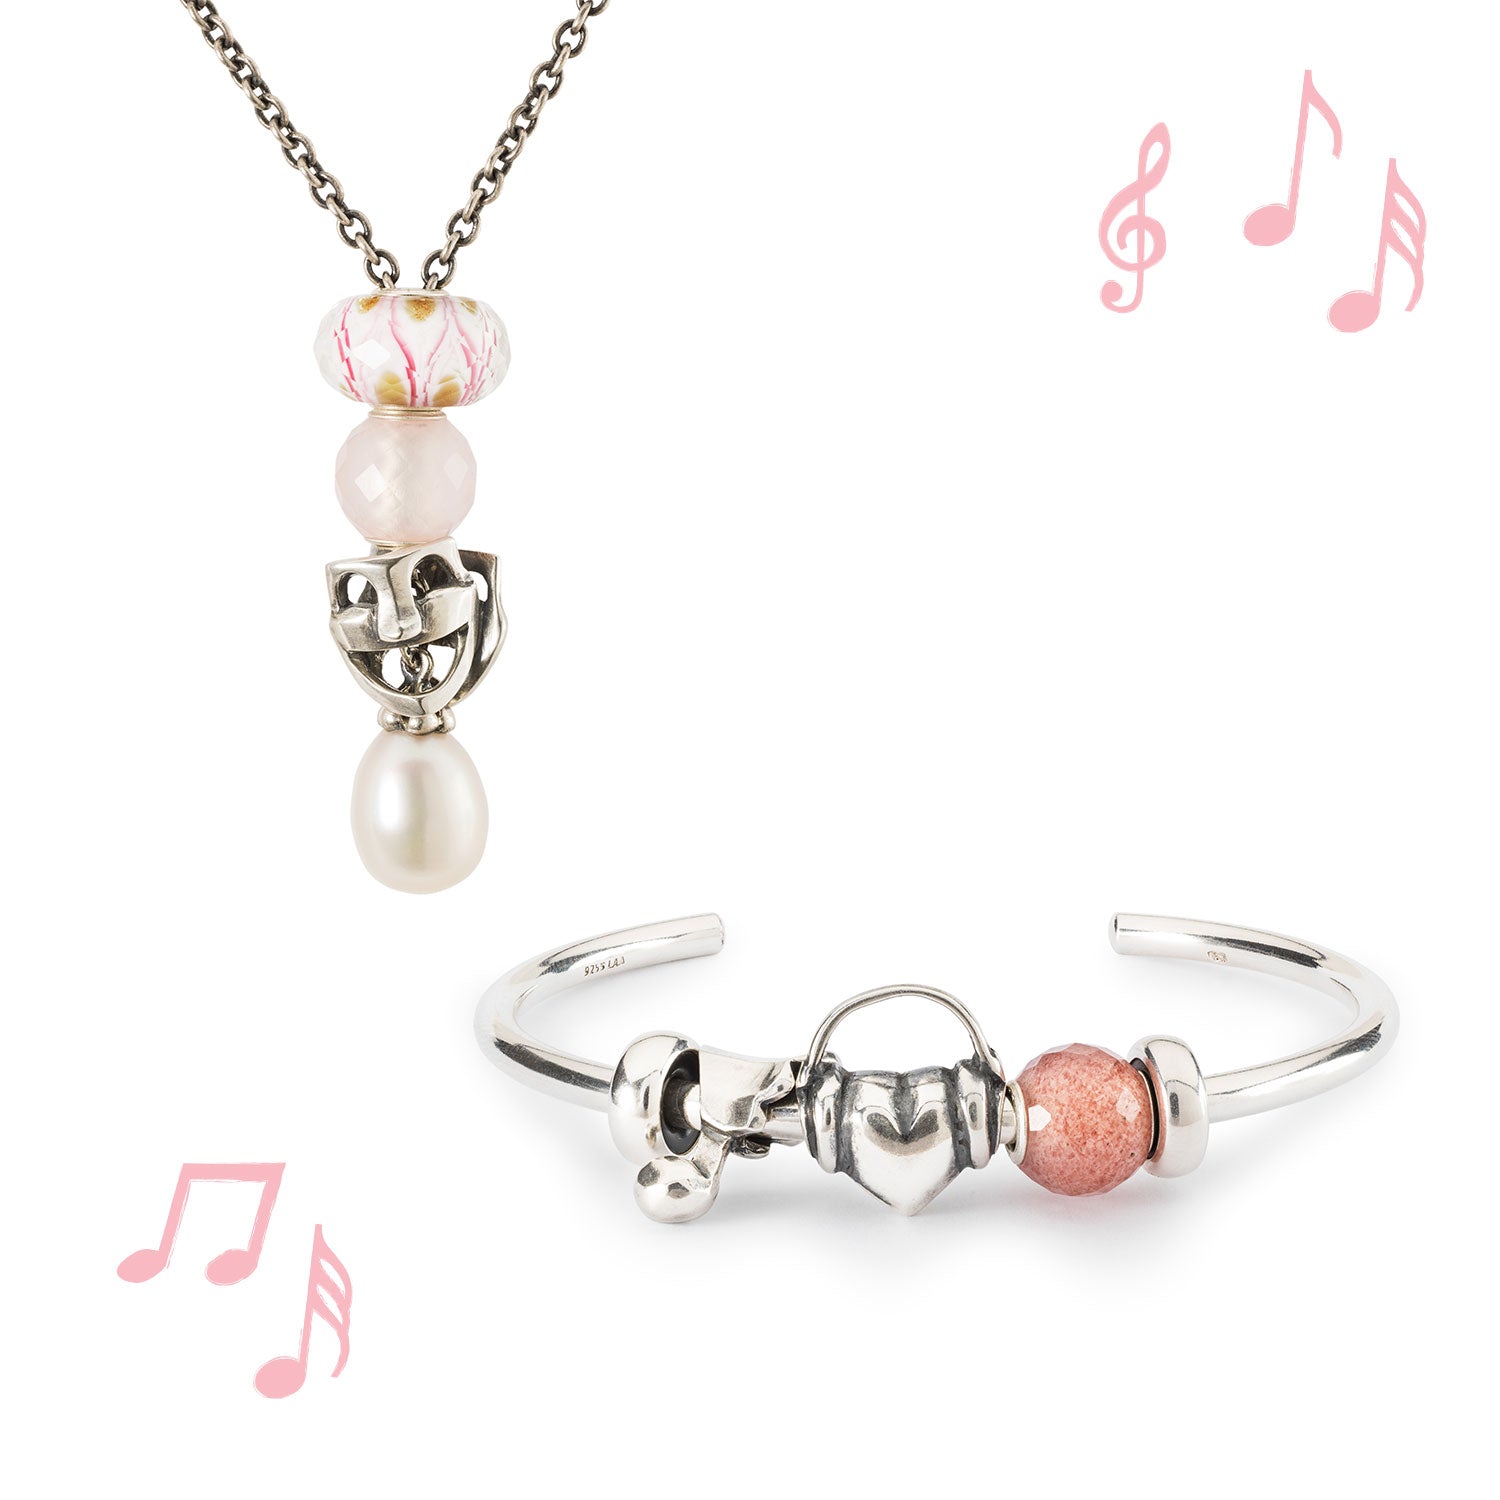 Trollbeads Bangle and necklace with beads in glass, silver, gemstone and pearl all with a music and theater theme